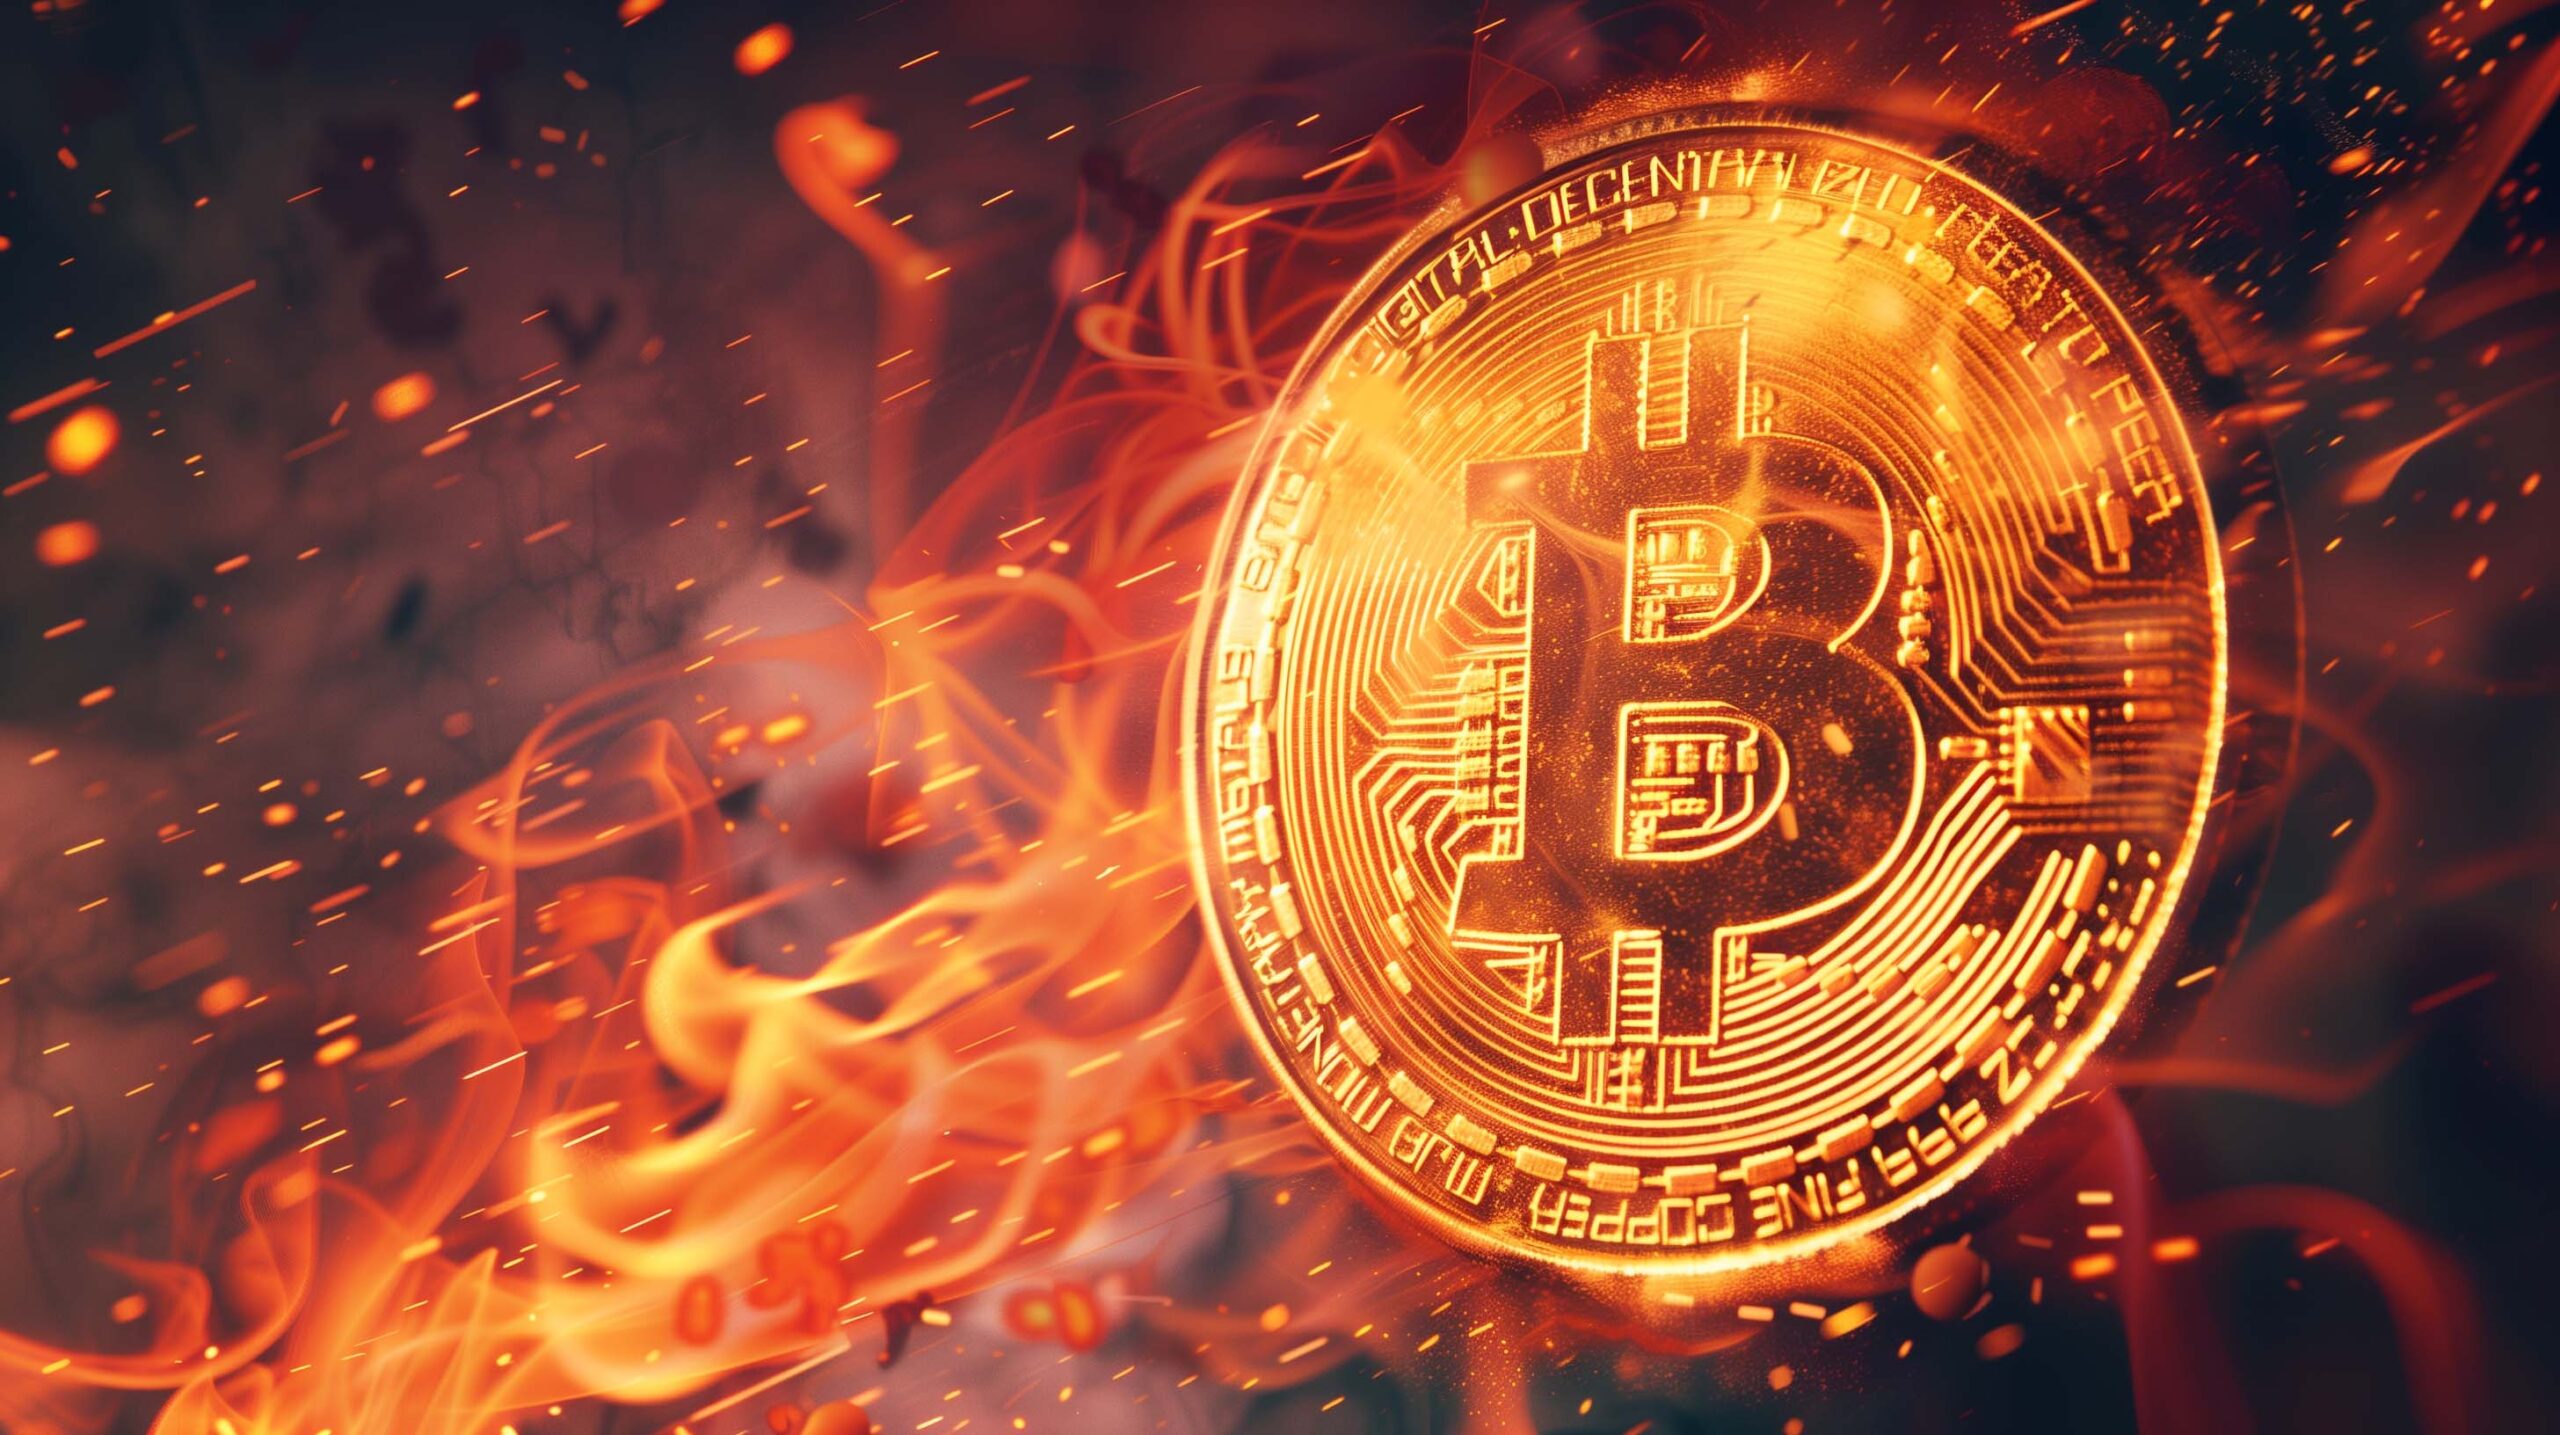 bitcoin in flames, bitcoin halving event